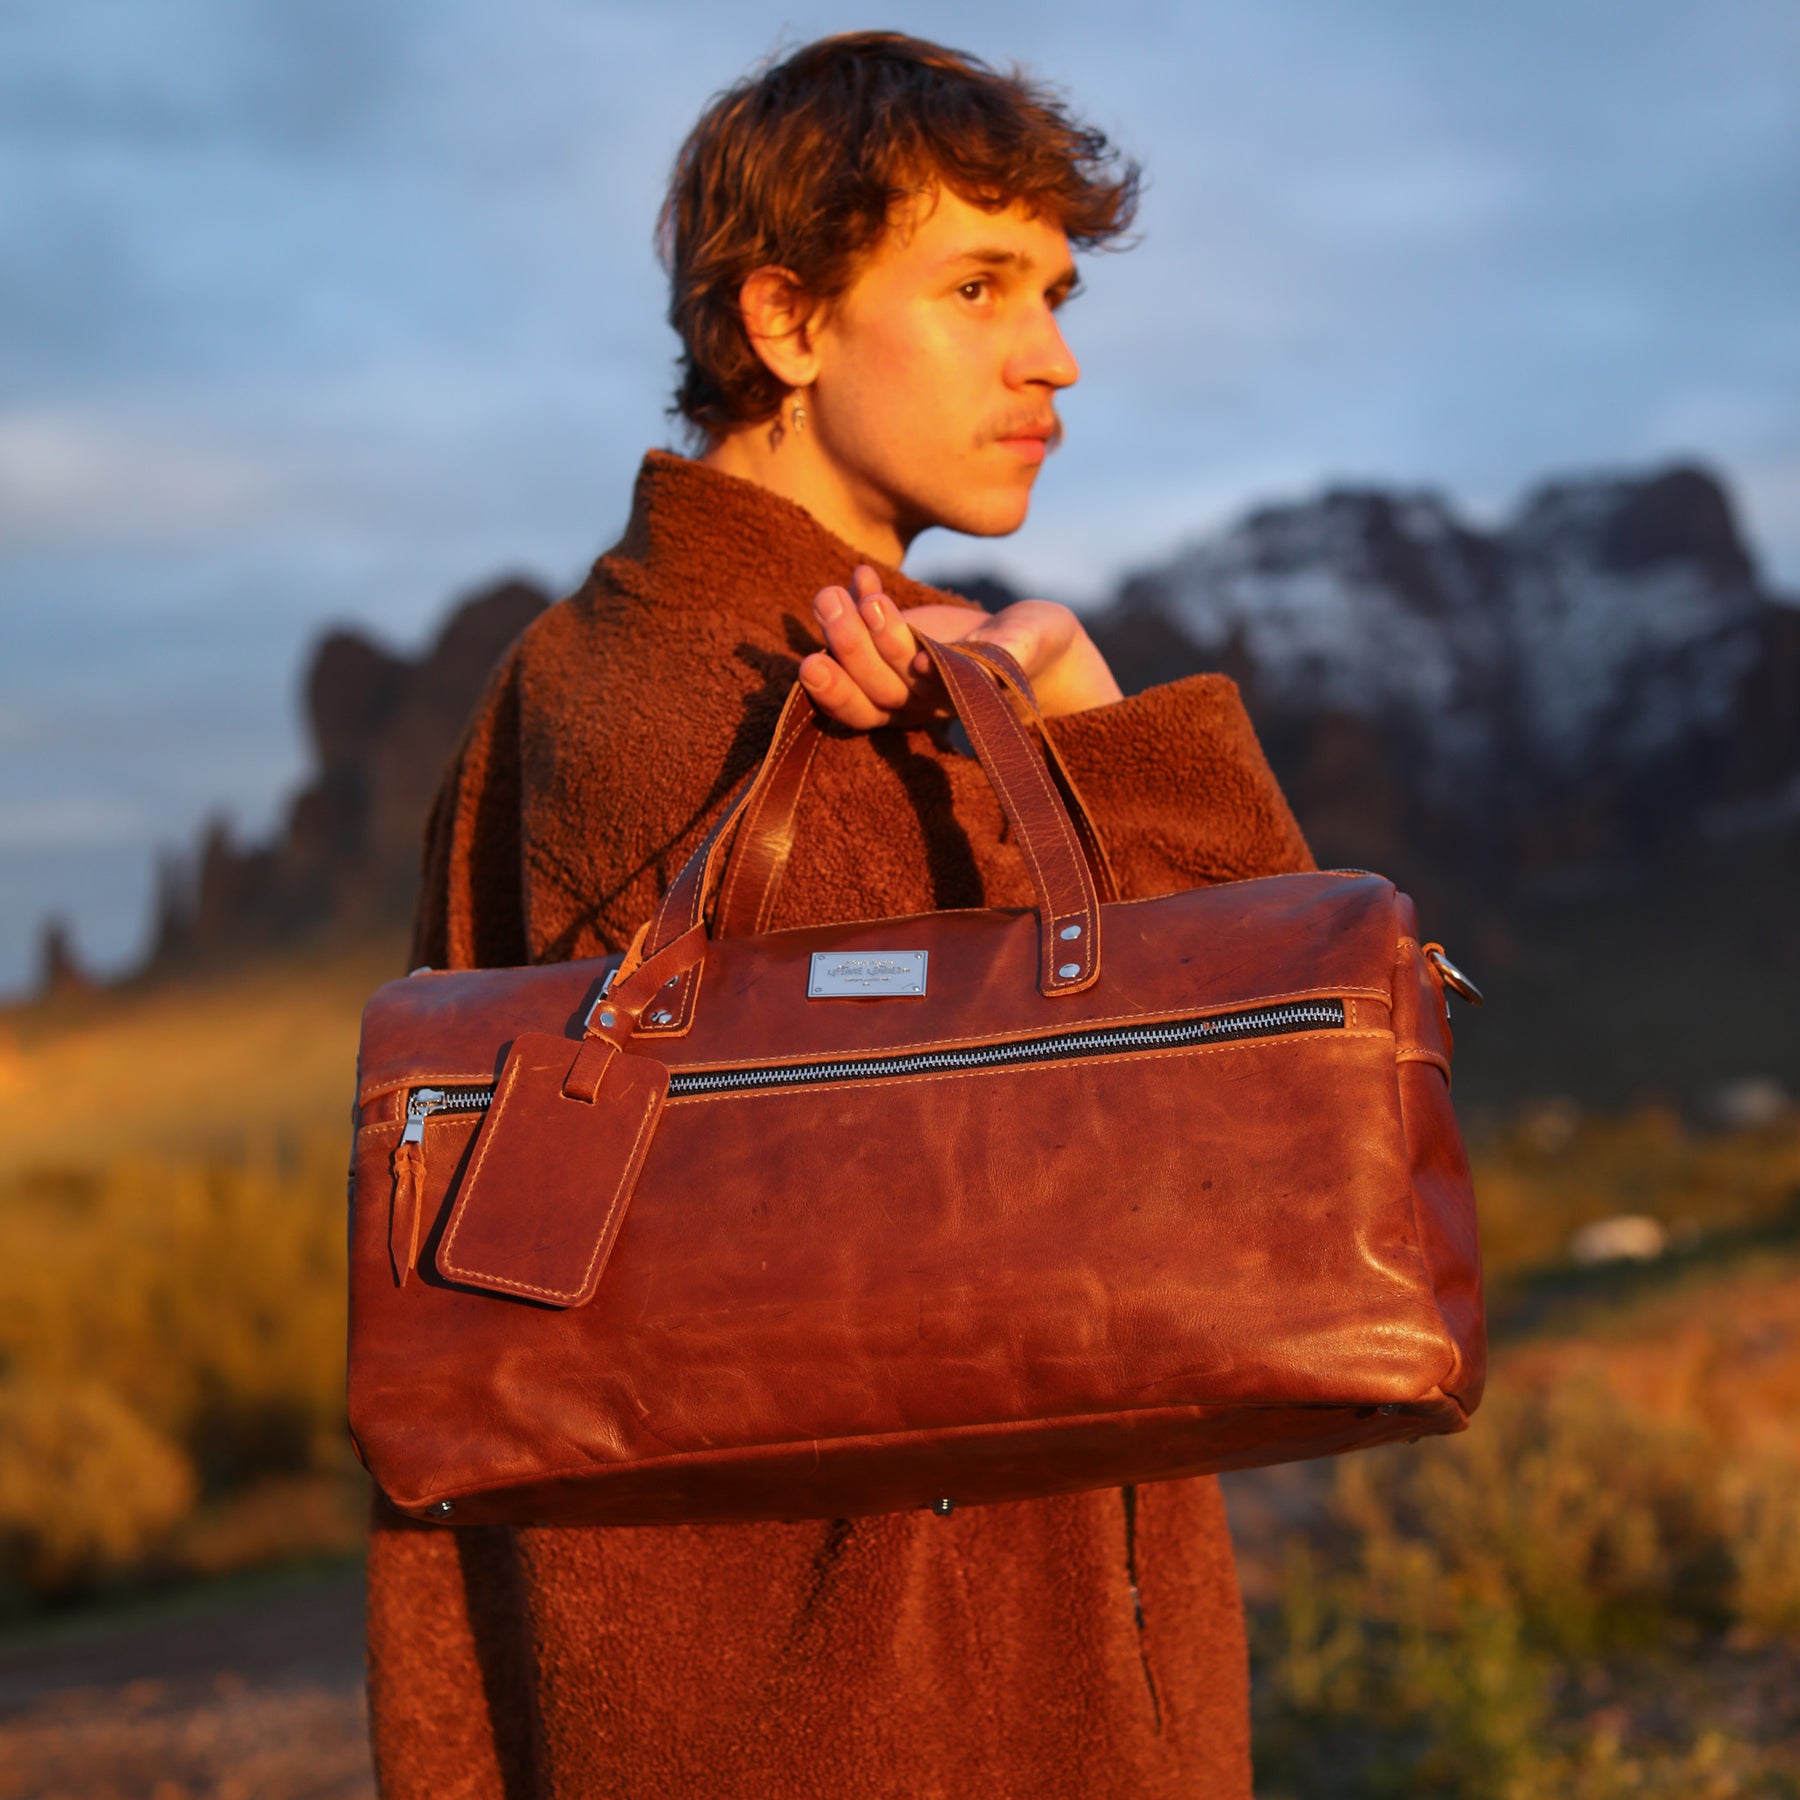 Handmade Leather Duffle Bag, leather travel bags by CraftShades Inc